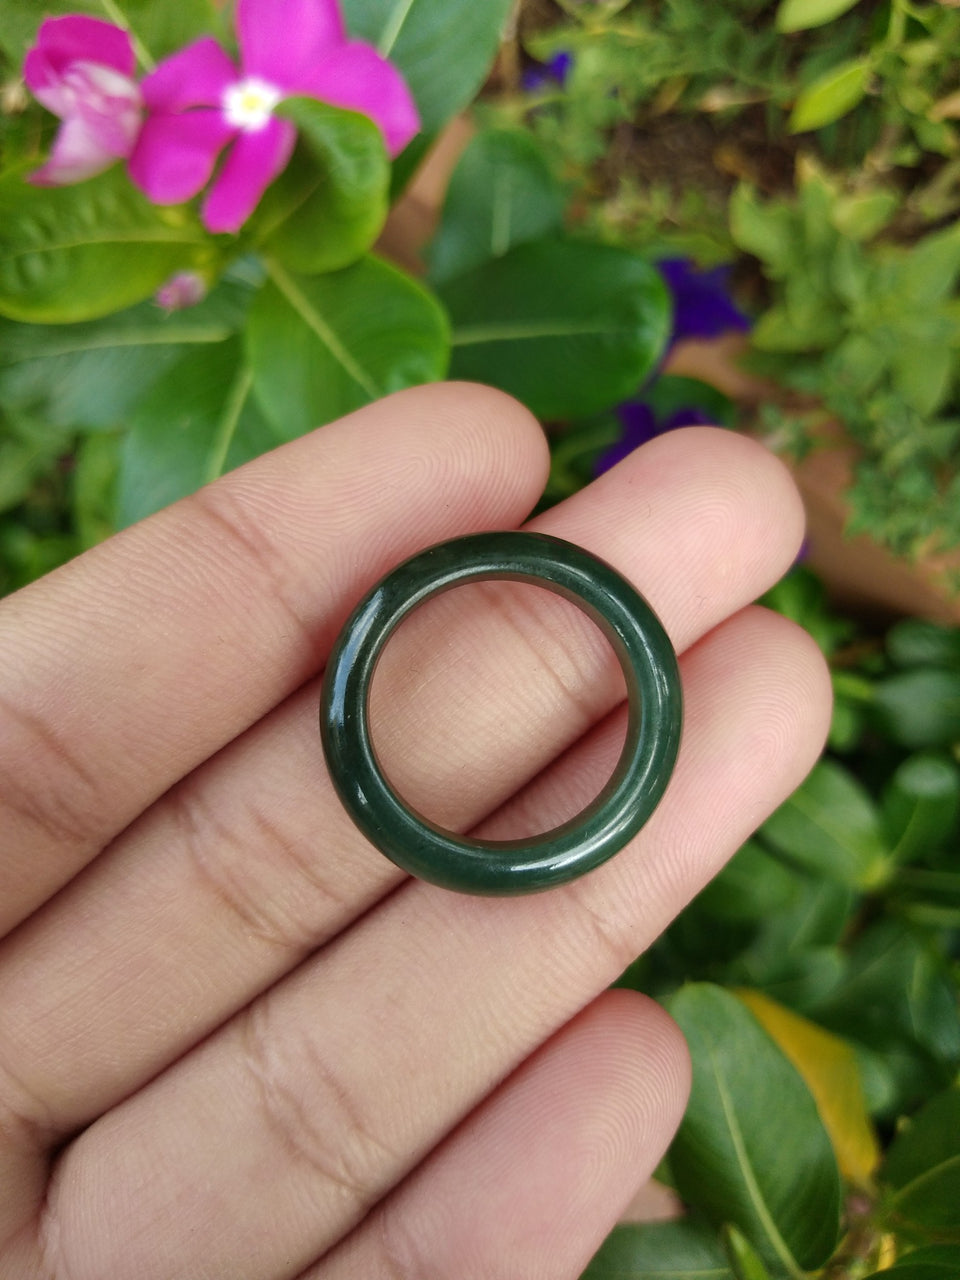 Natural Jadeite Jade ring Thailand jewelry stone mineral size  7.75 US  EB 067